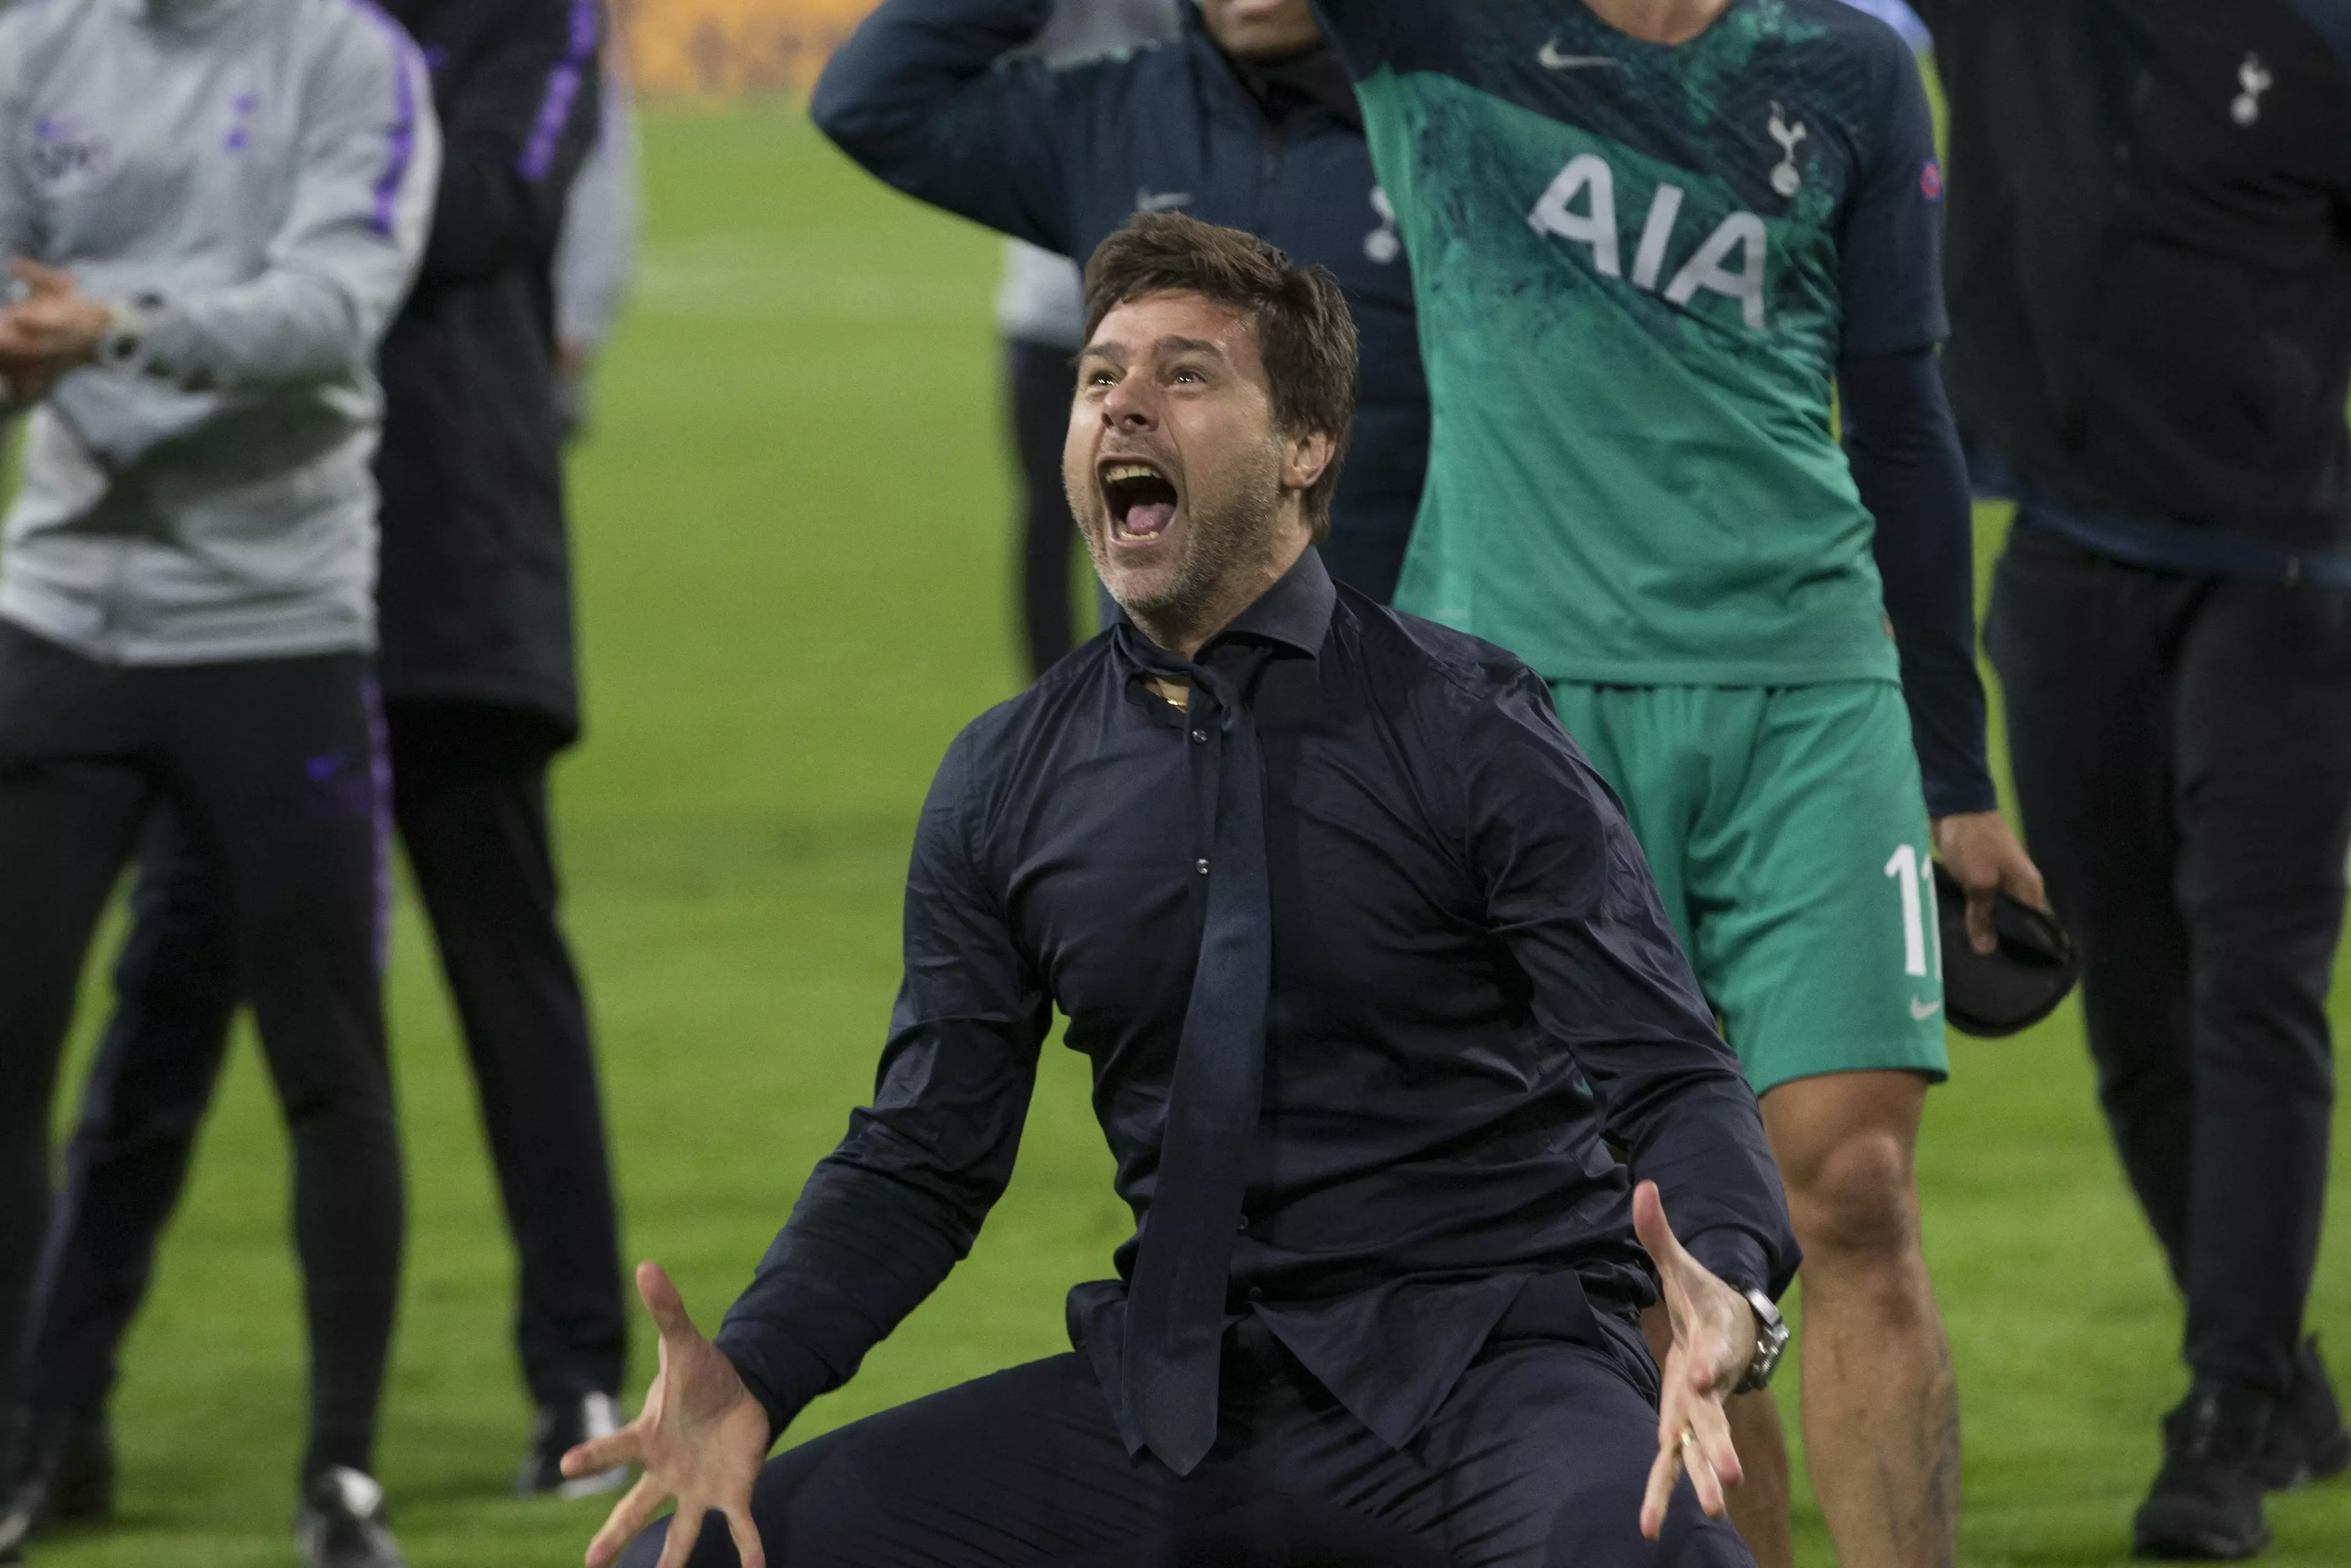 Pochettino passionately celebrates with the fans after guiding the team to the Champions League final. Image: PA Images